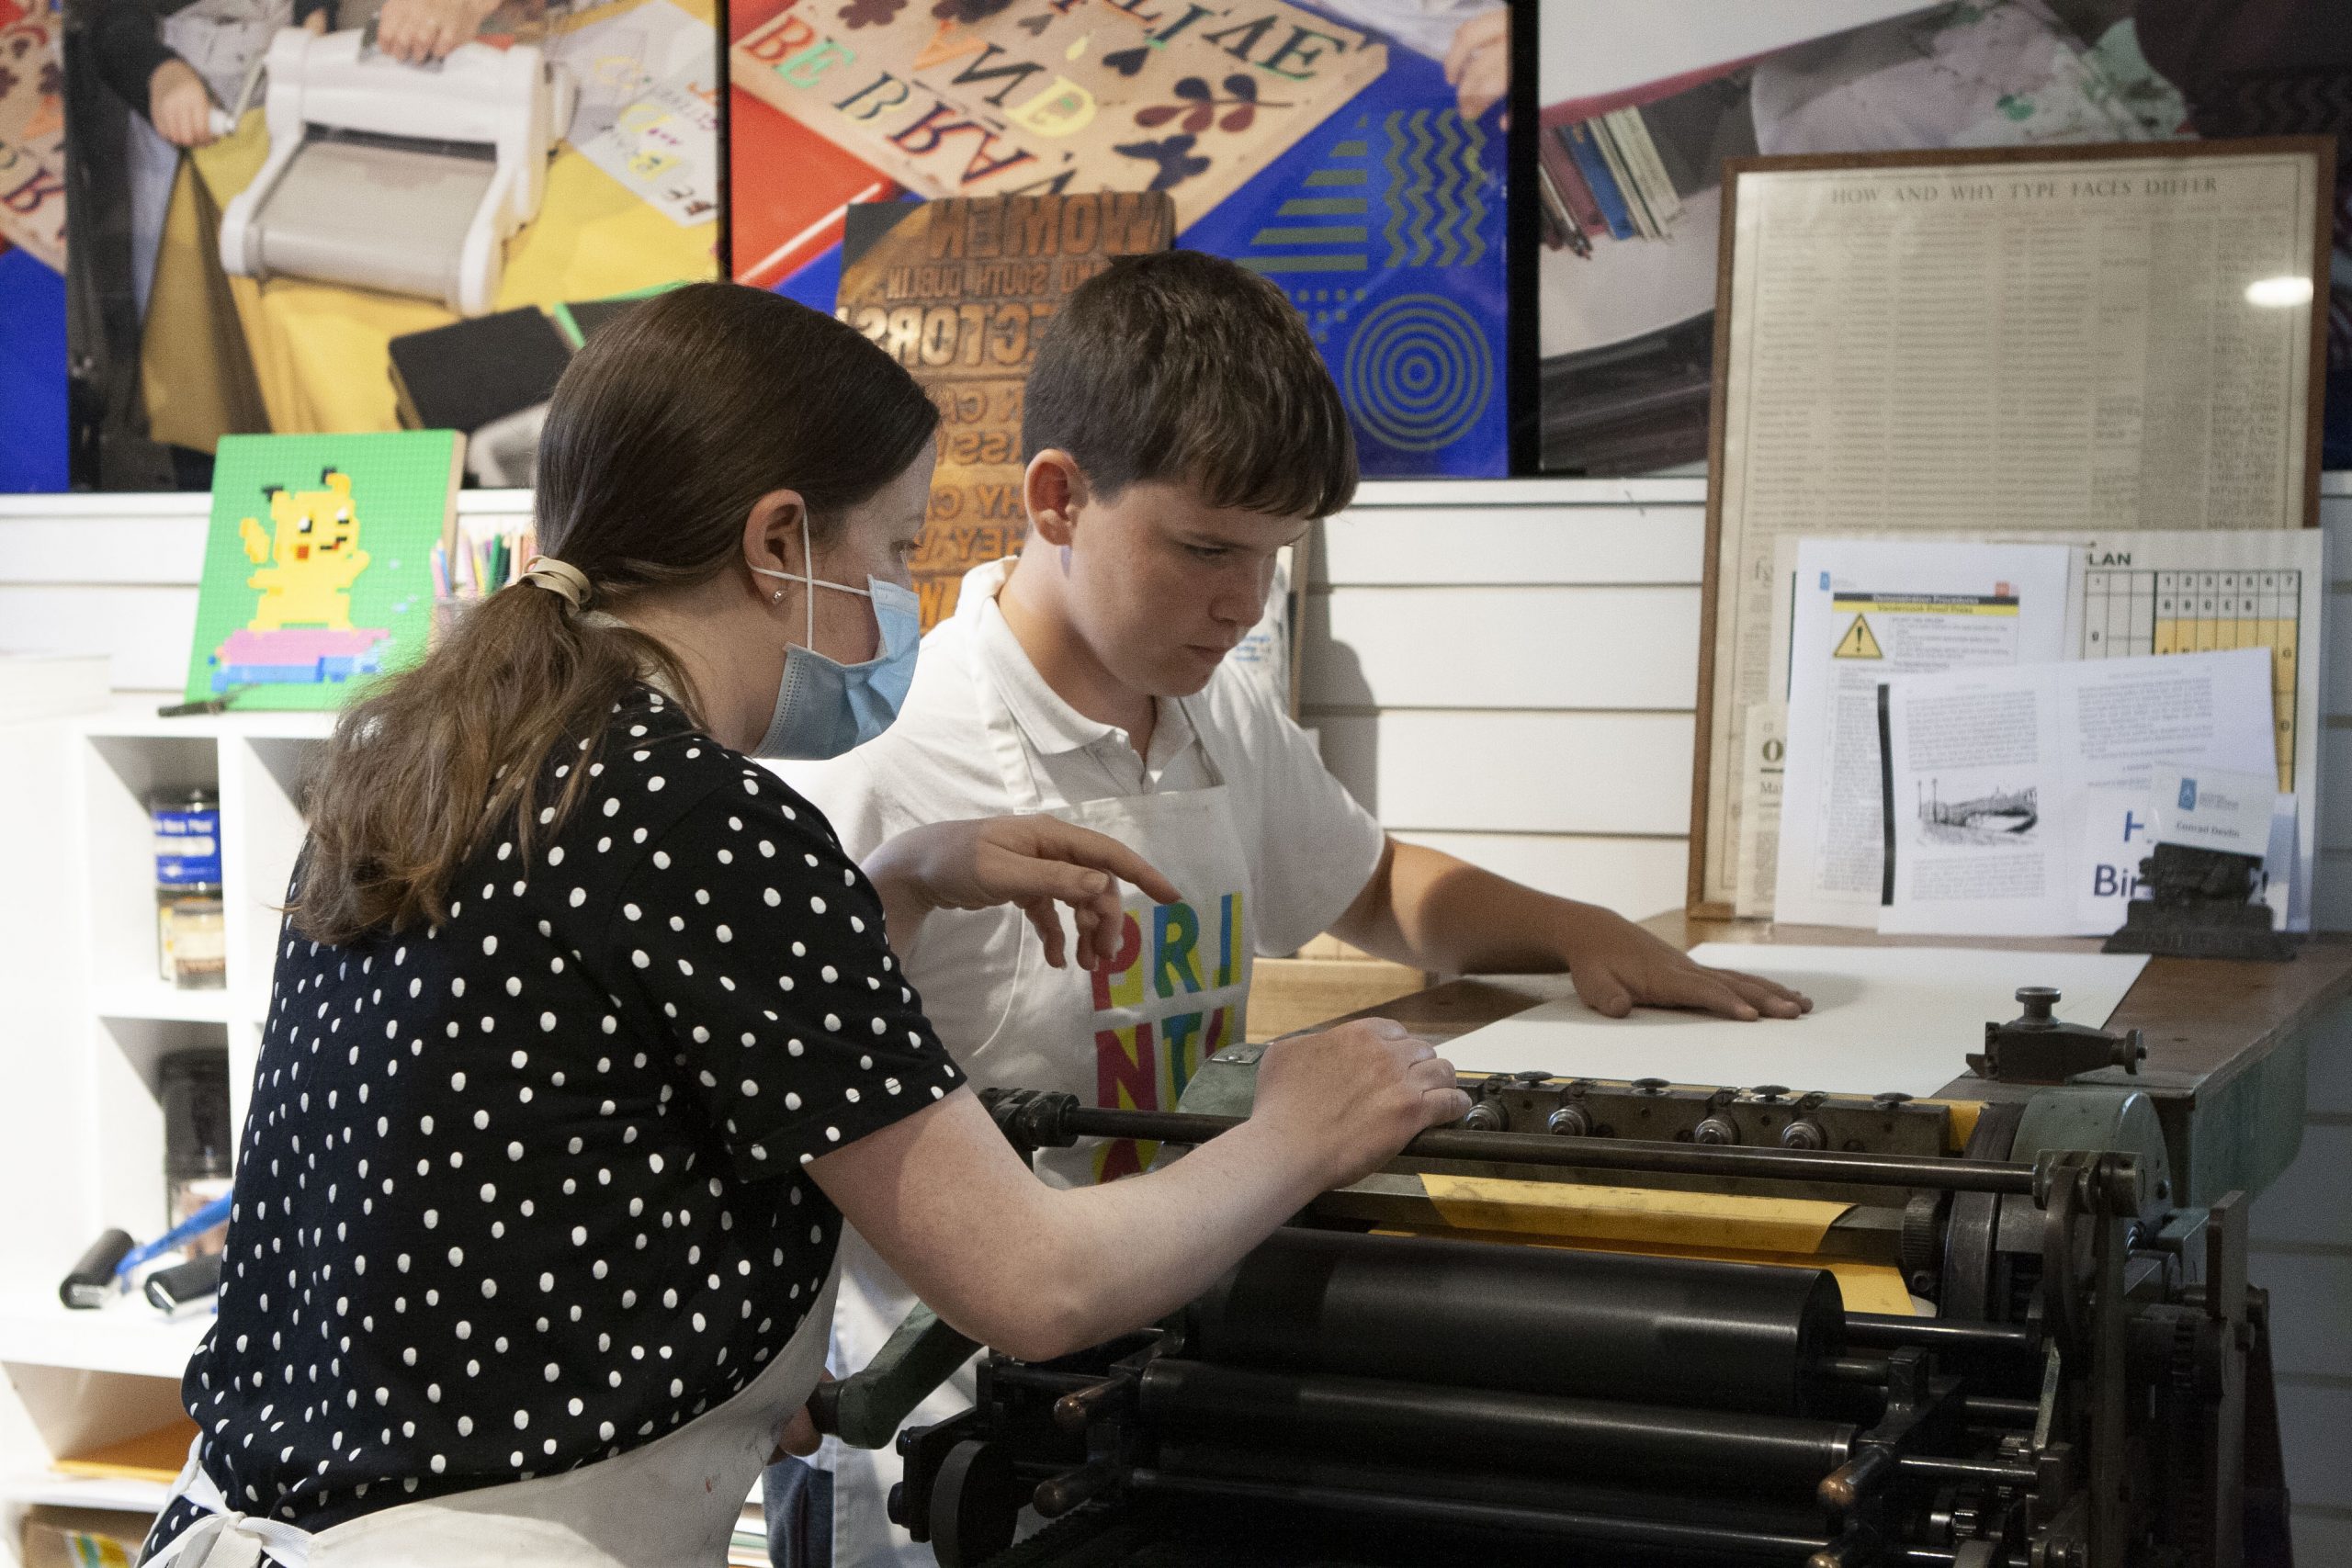 Mary Plunkett showing students how to use the letterpress for printing.